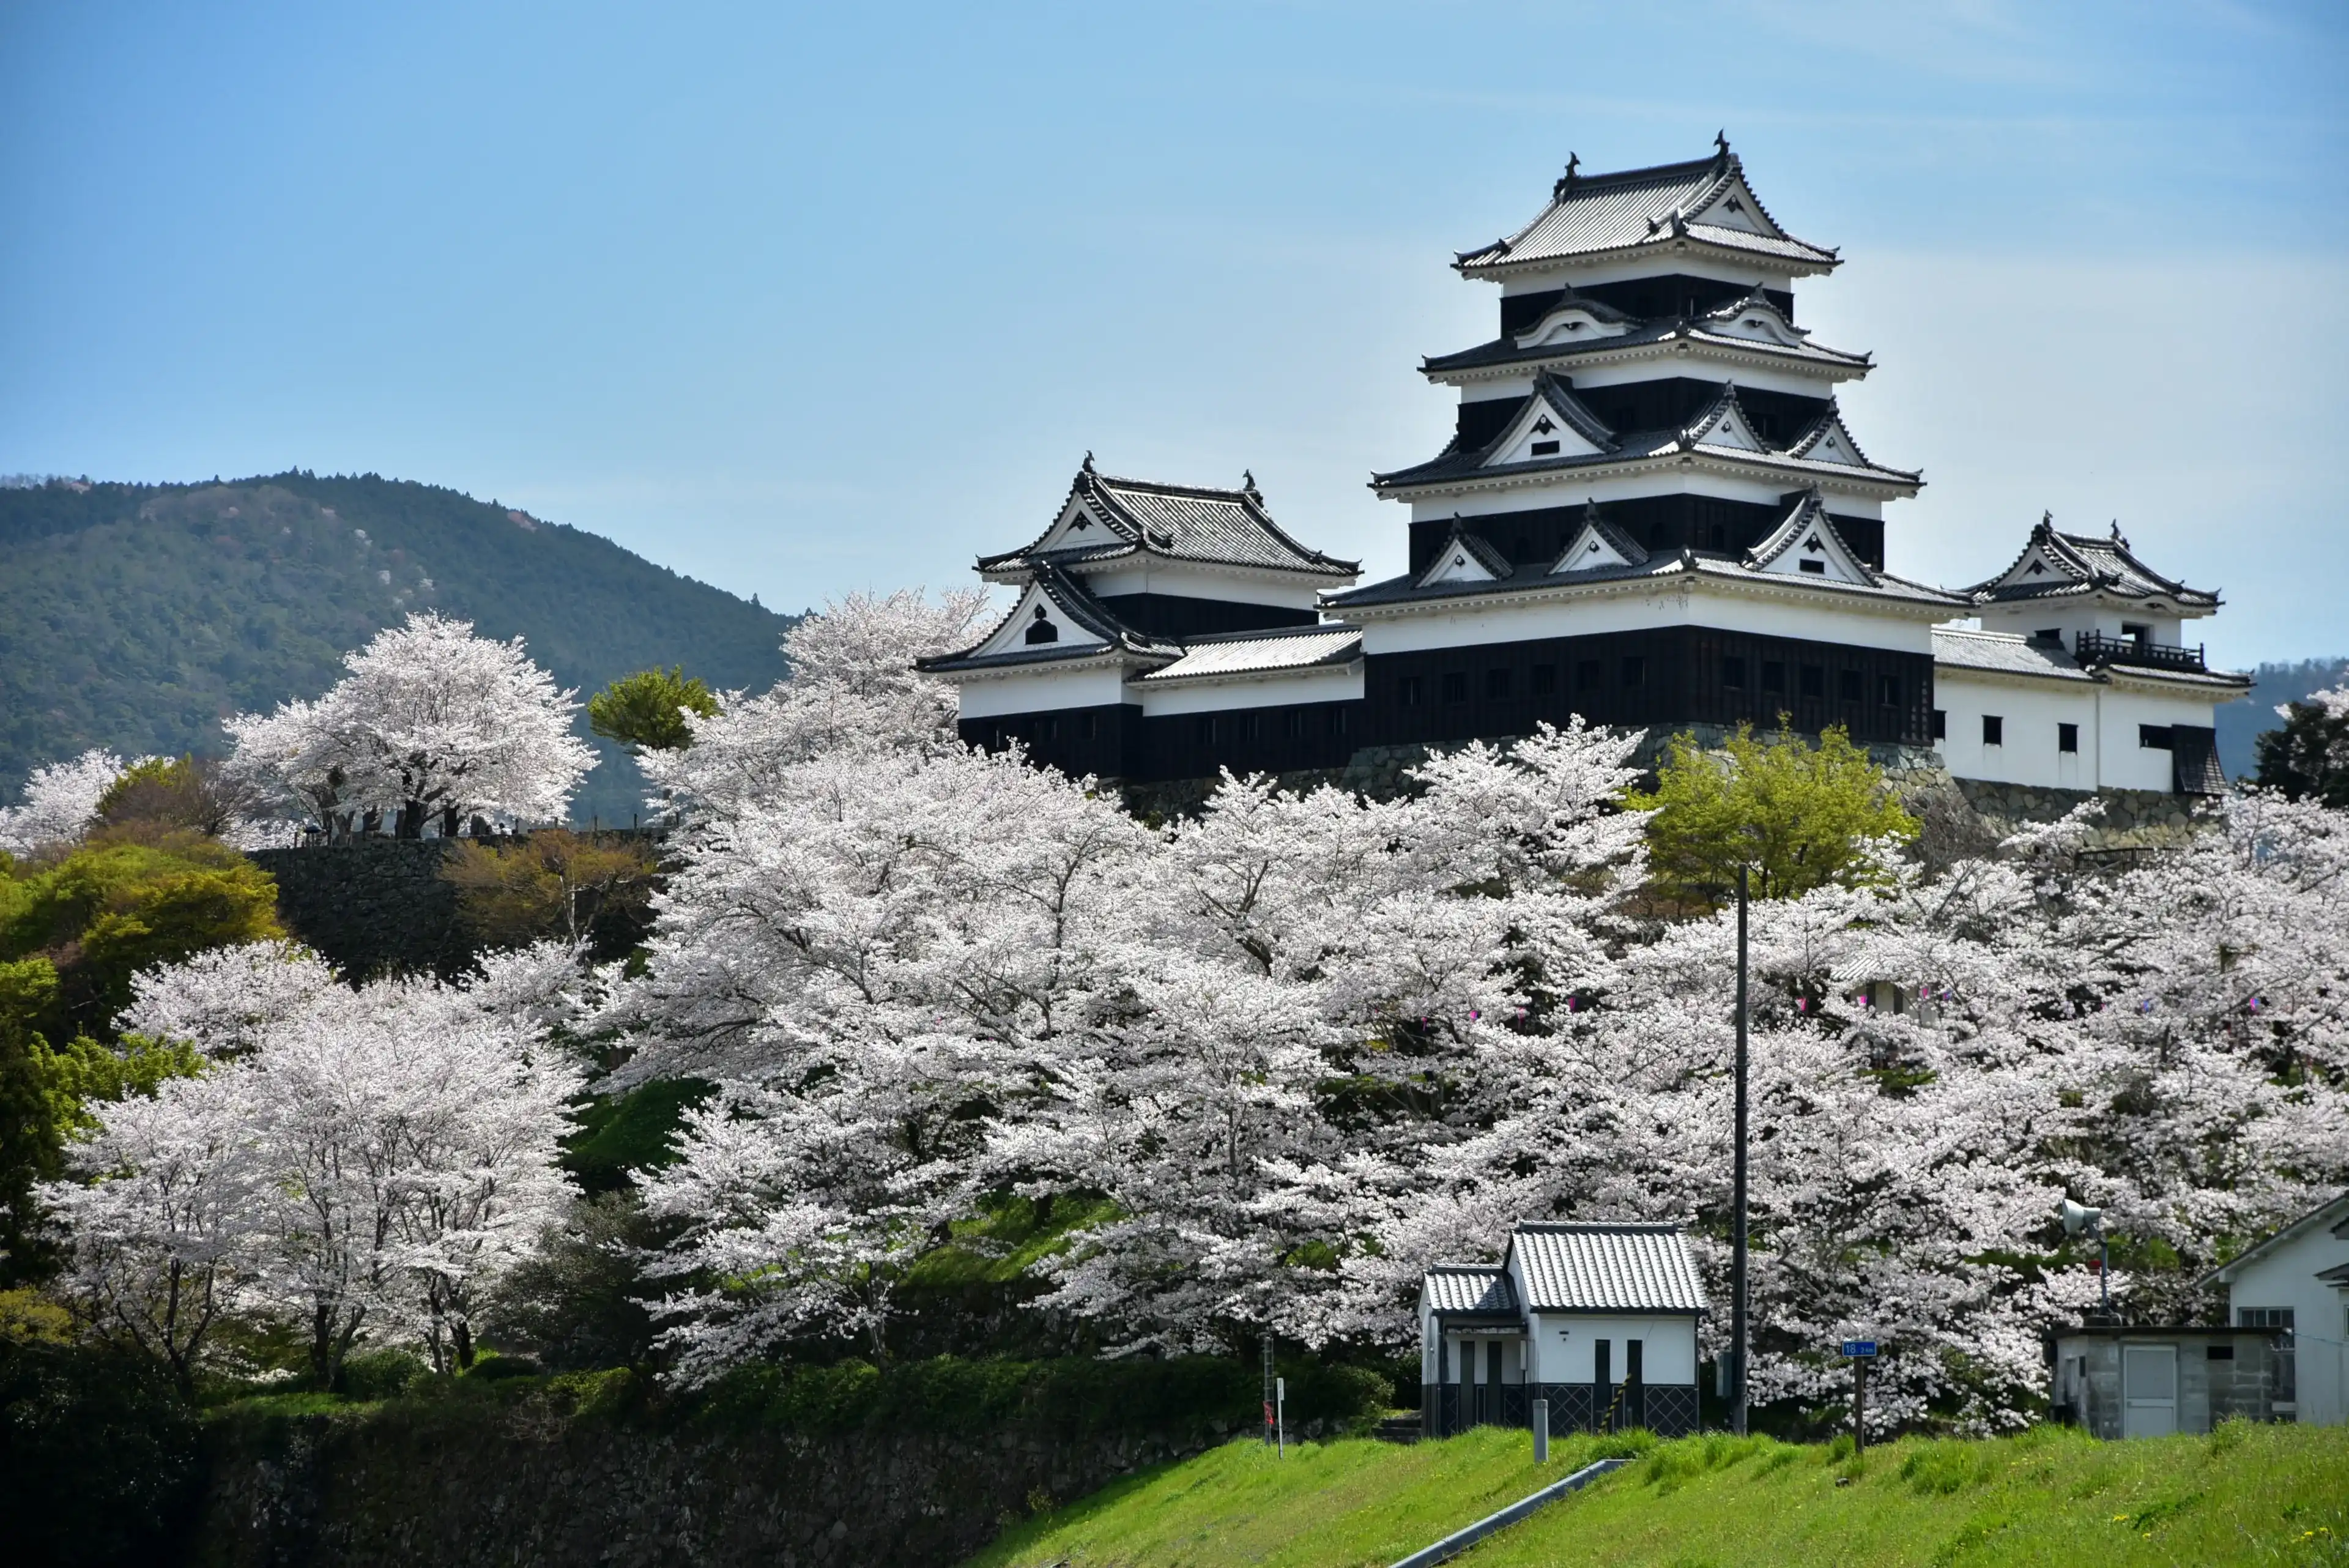 Cherry blossoms in full bloom are blooming in the castle